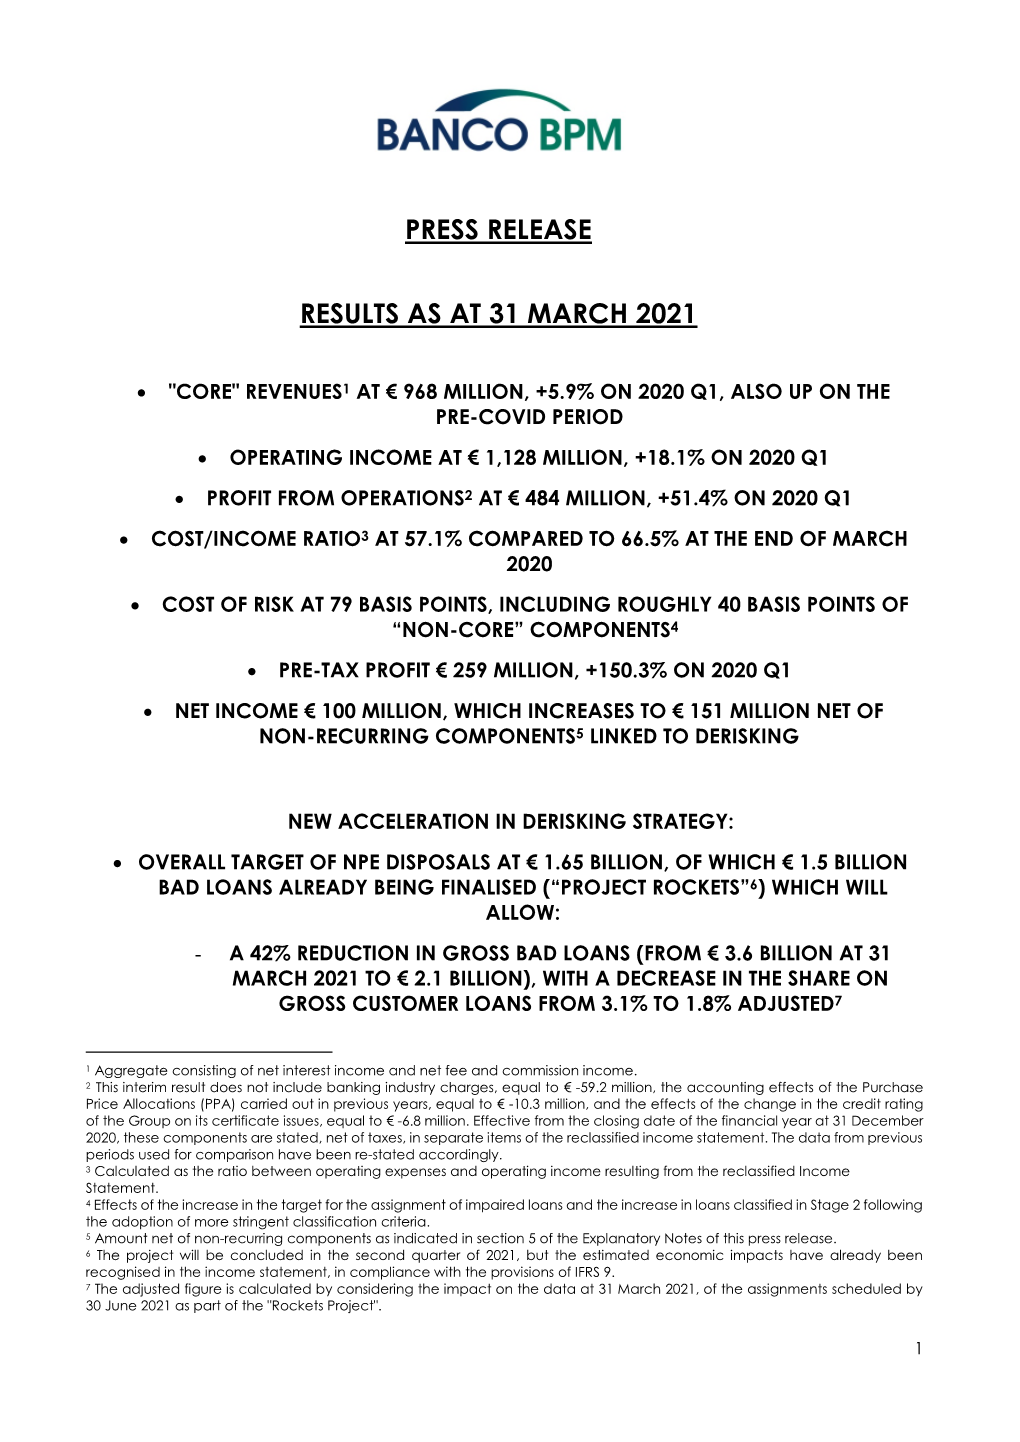 Press Release Results As at 31 March 2021